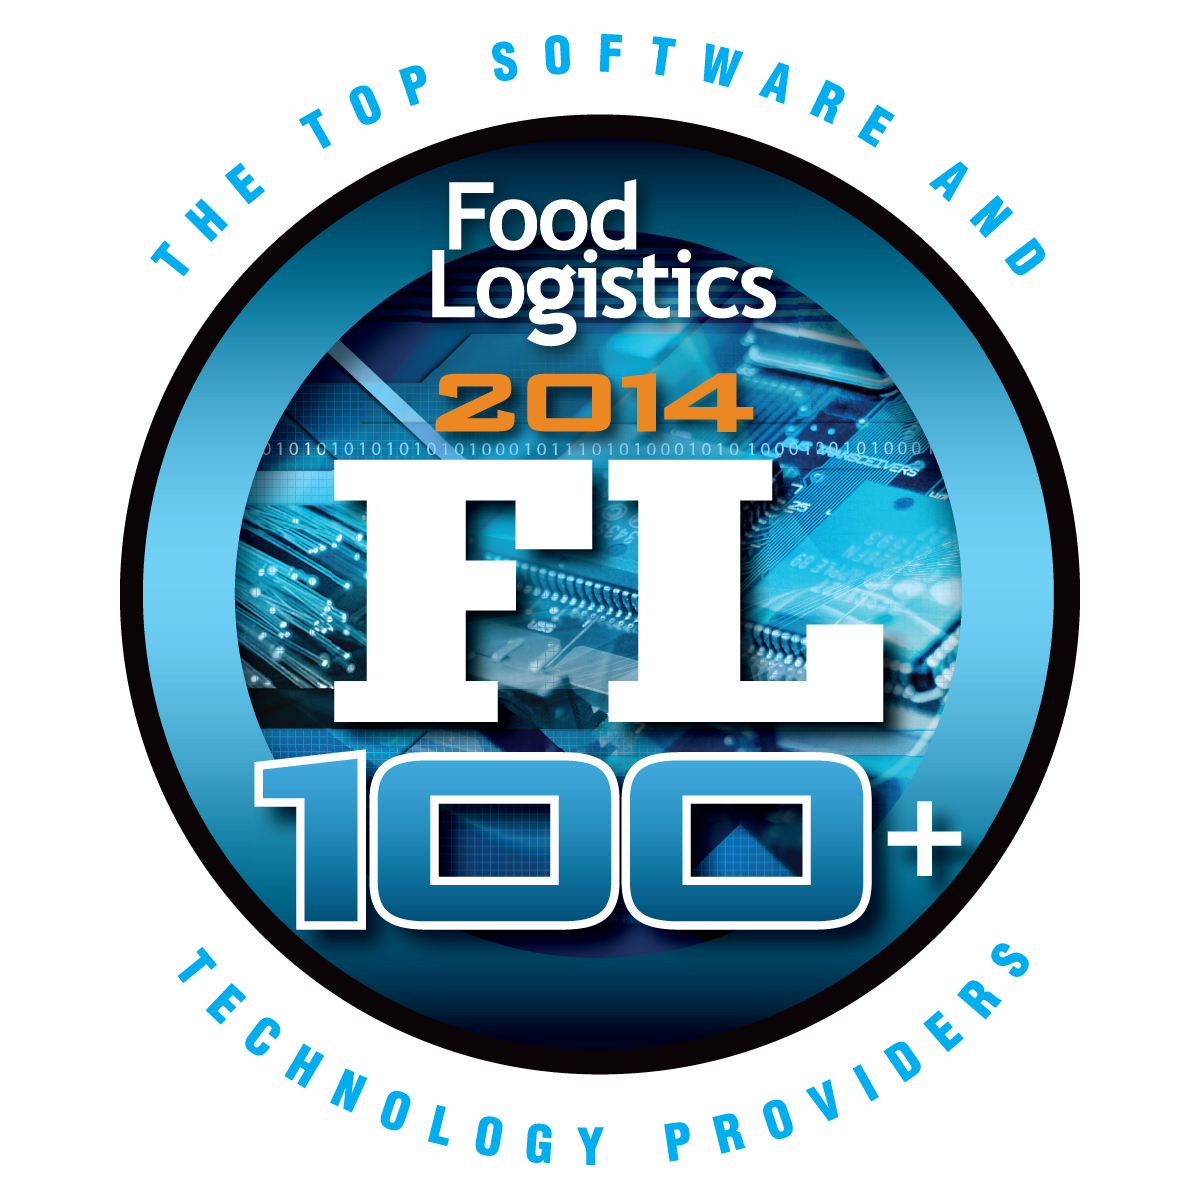 Fleet Advantage Recognized as Food Logistics 2014 Top 100 Software and Technology Provider